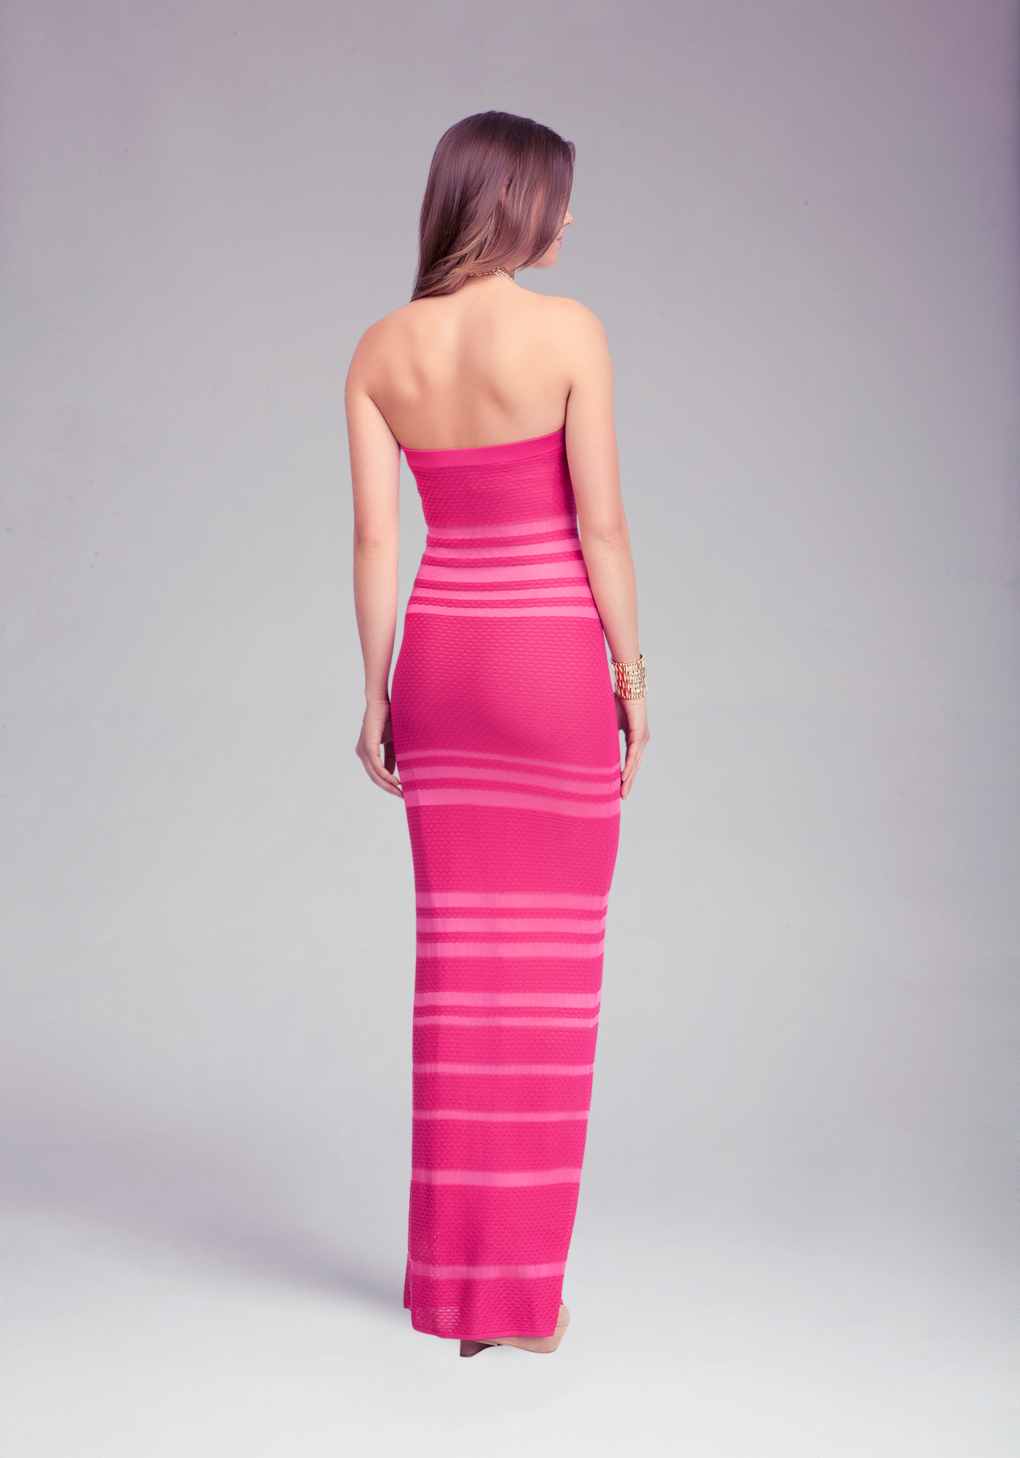 Lyst - Bebe Sheer Opaque Strapless Maxi Dress in Pink